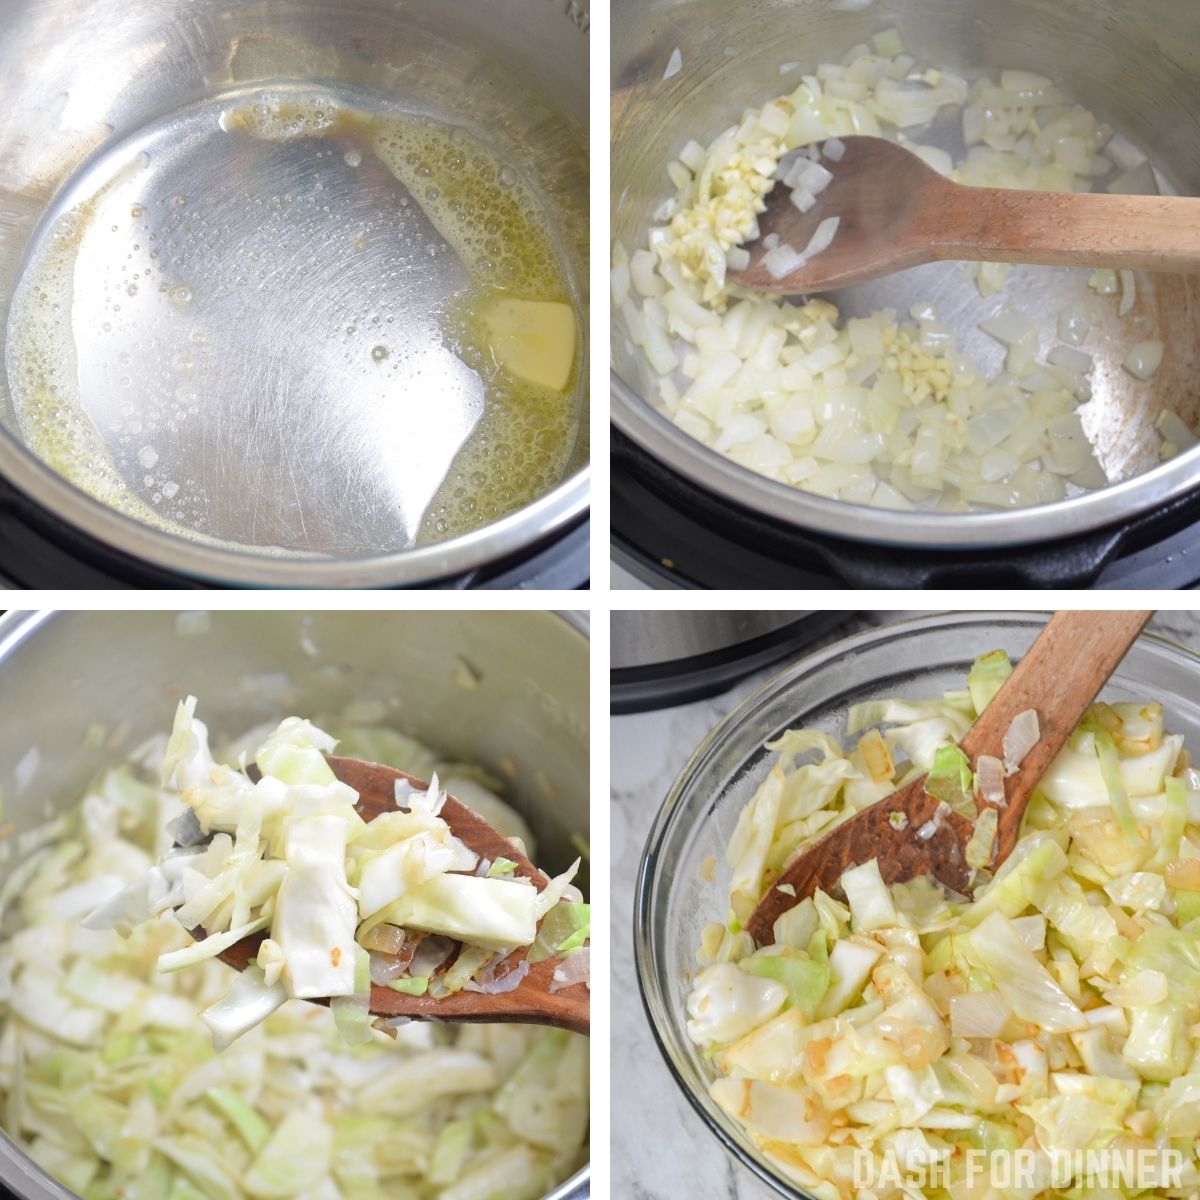 Melting butter in the Instant Pot and adding onion and cabbage to soften.